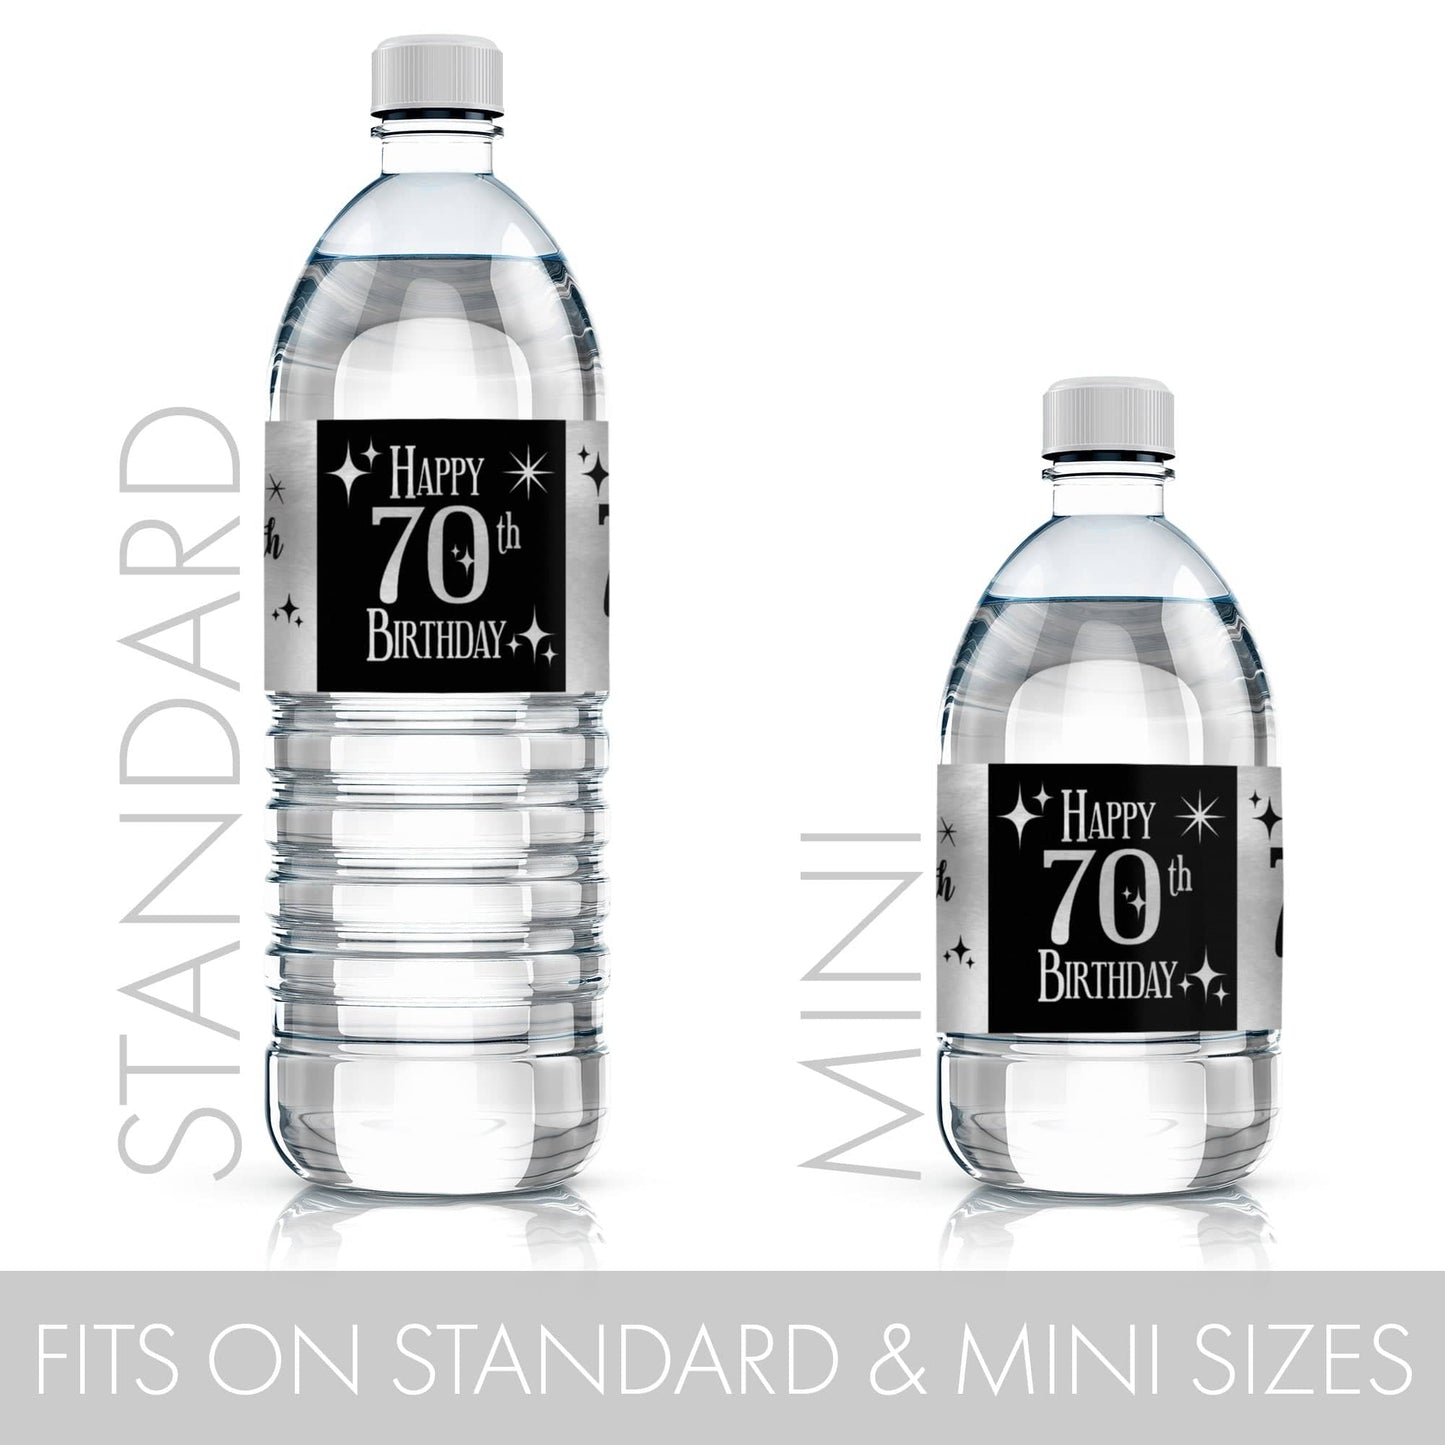 Make your celebration shine with these 24 count black and silver 70th birthday water bottle labels.